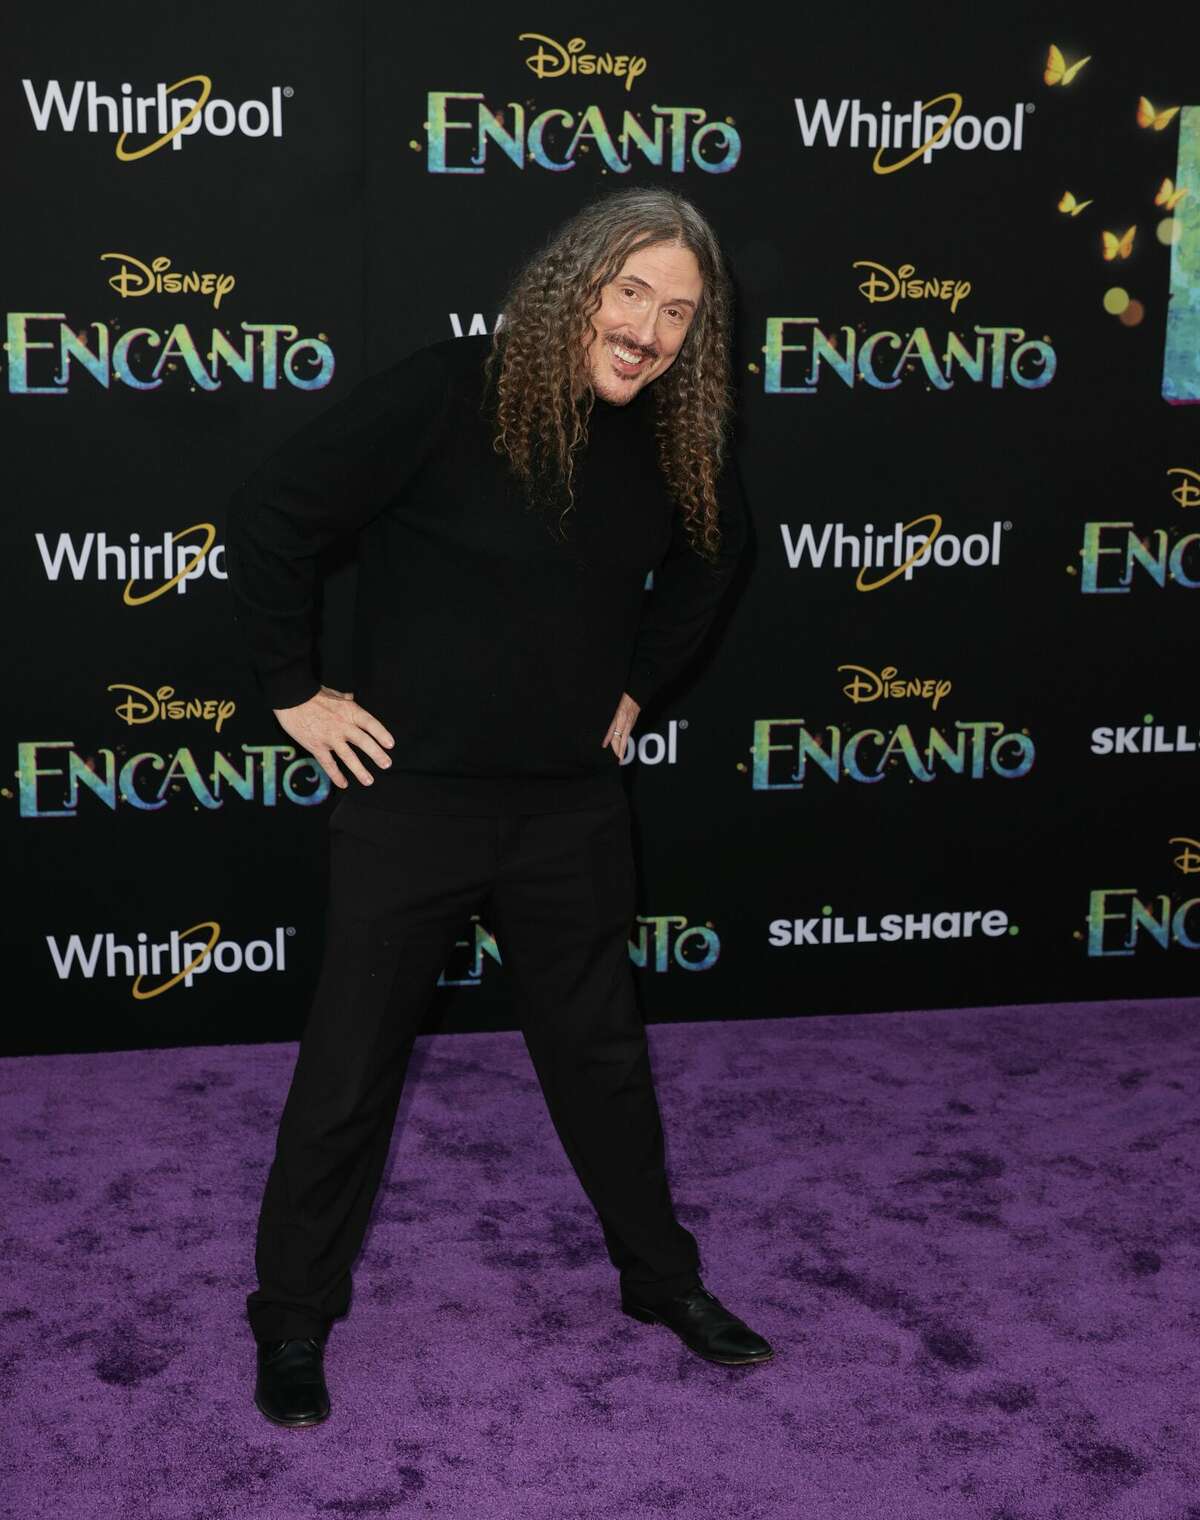 "Weird Al" Yankovic in late 2021 in Los Angeles, California. Yankovic performed at a sold-out show at the Egg on Wednesday, April 27, 2022. (Photo by Kevin Winter/Getty Images)